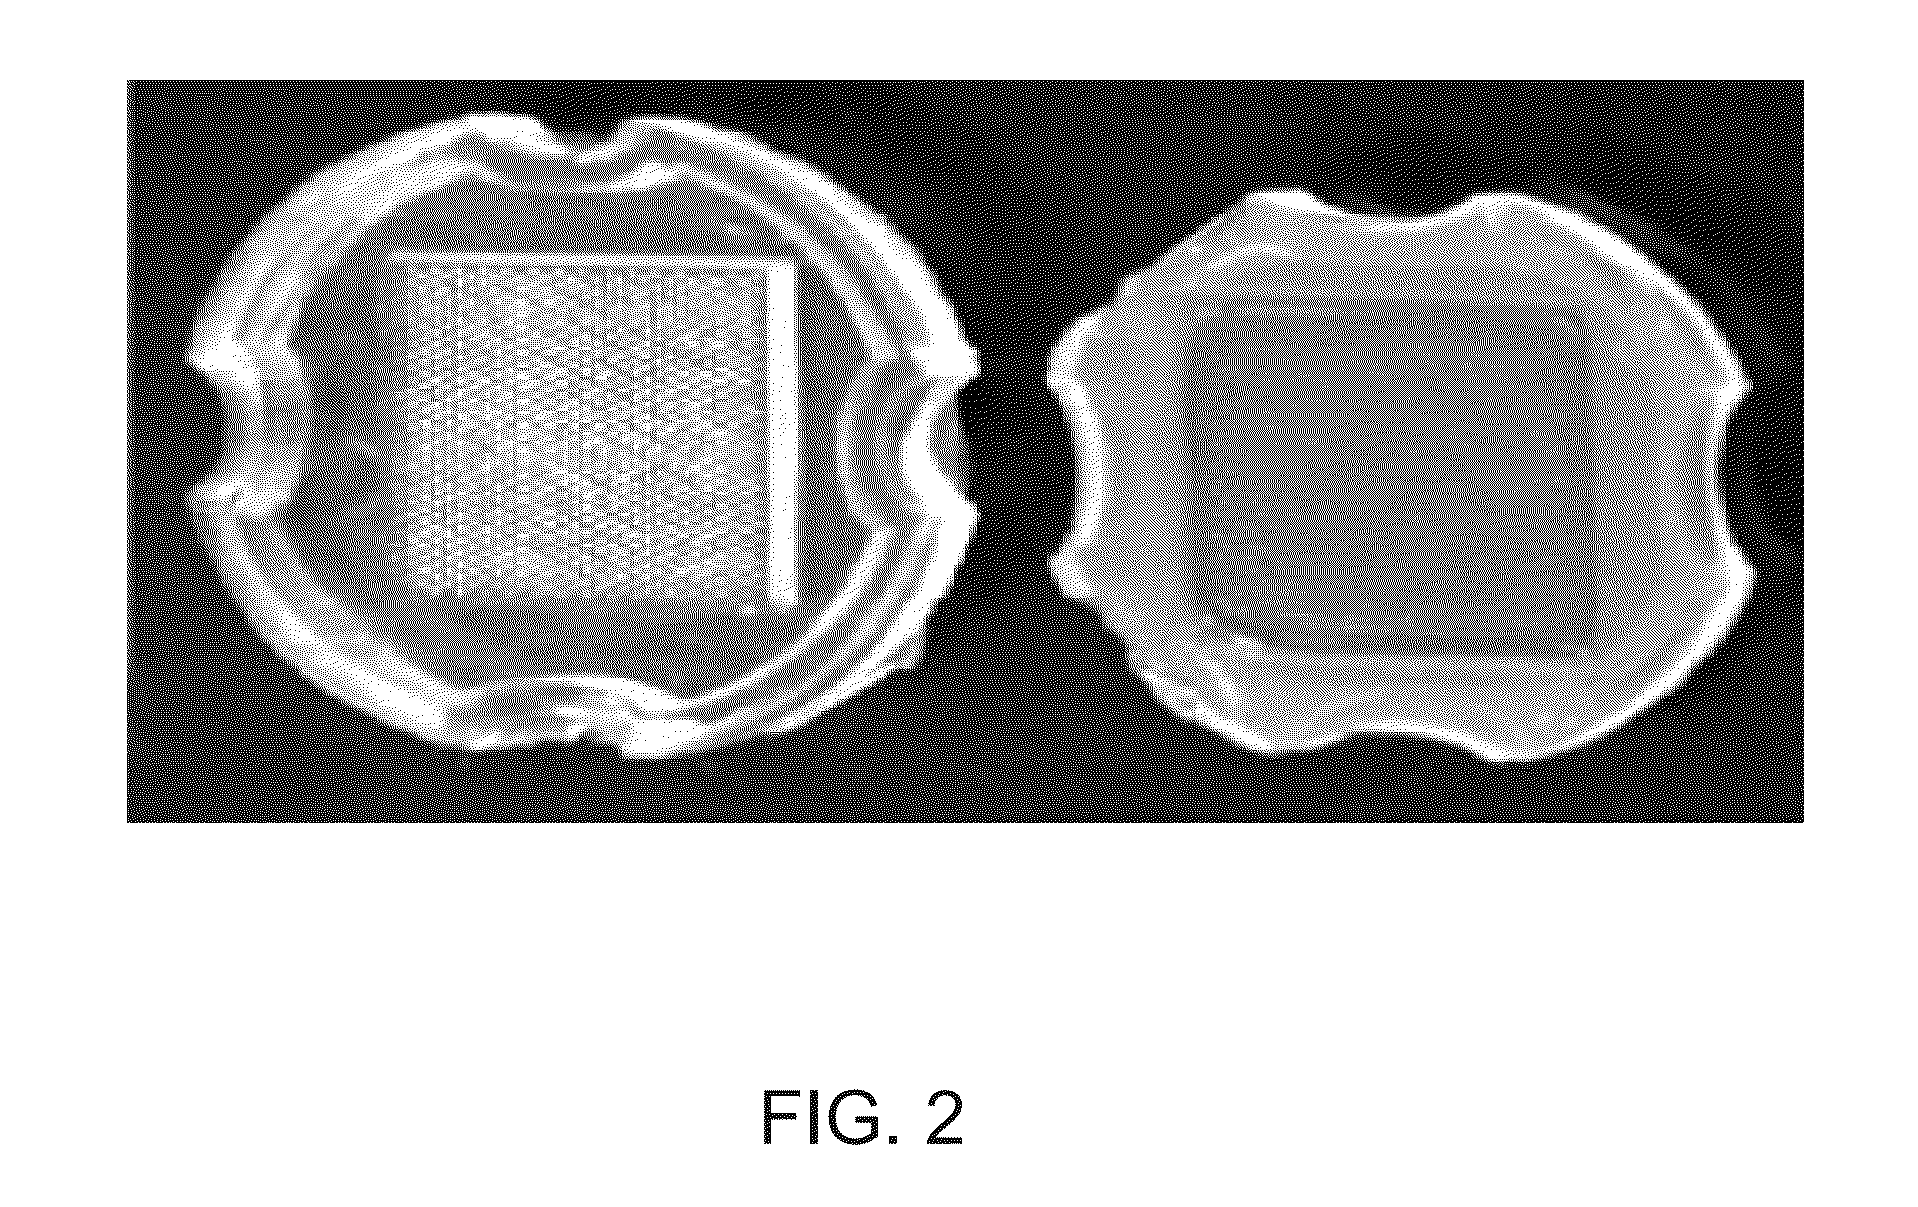 De Novo Anembryonic Trophoblast Vesicles and Methods of Making and Using Them